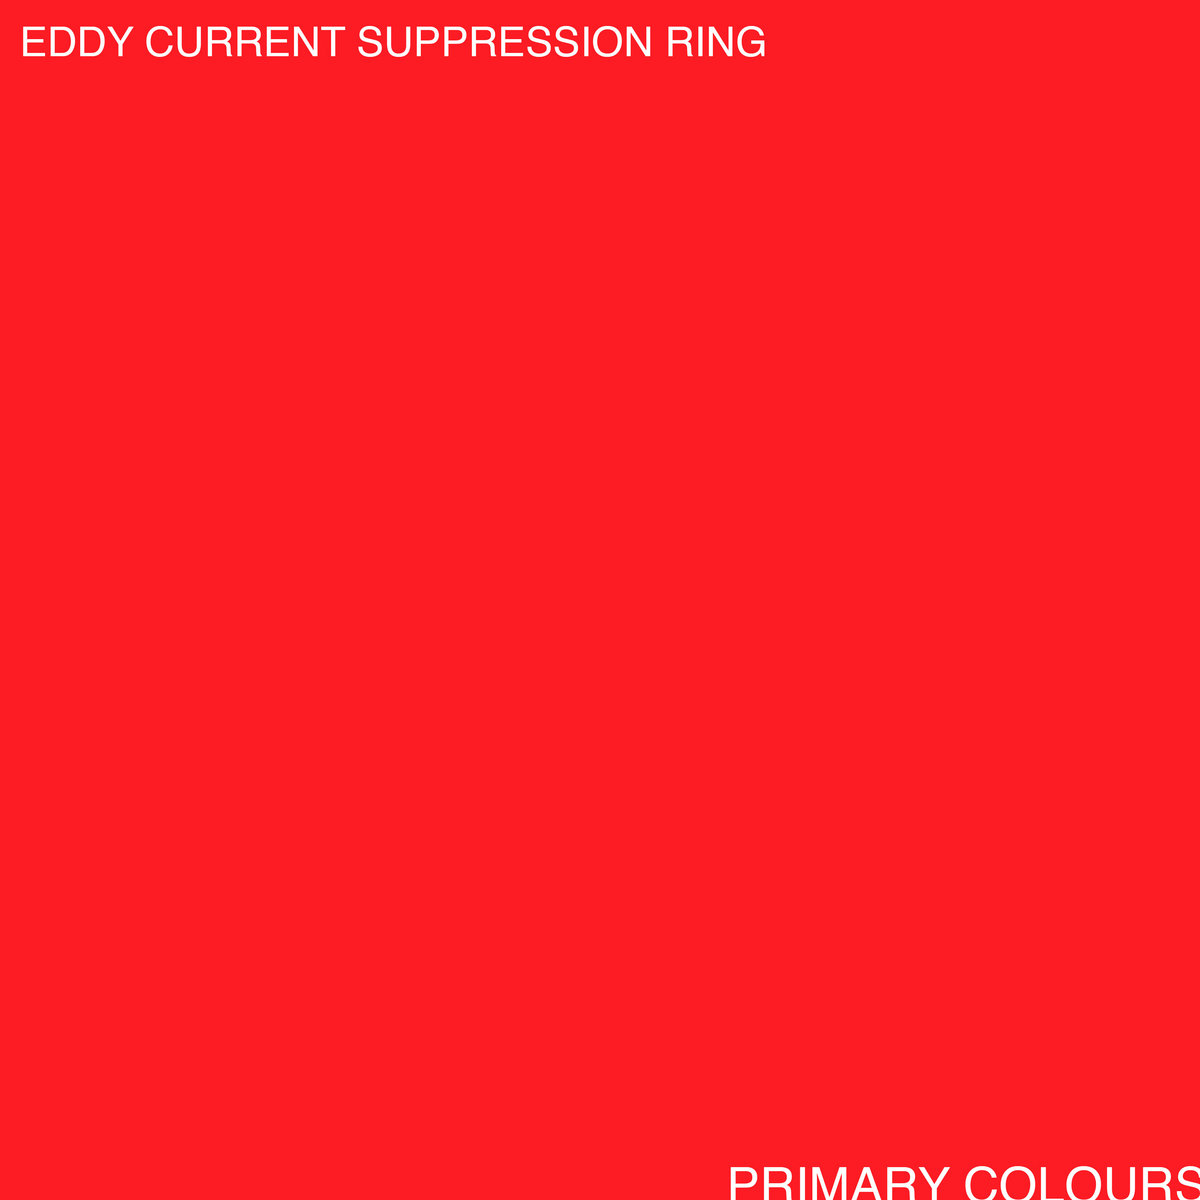 Primary Colours | Eddy Current Suppression Ring